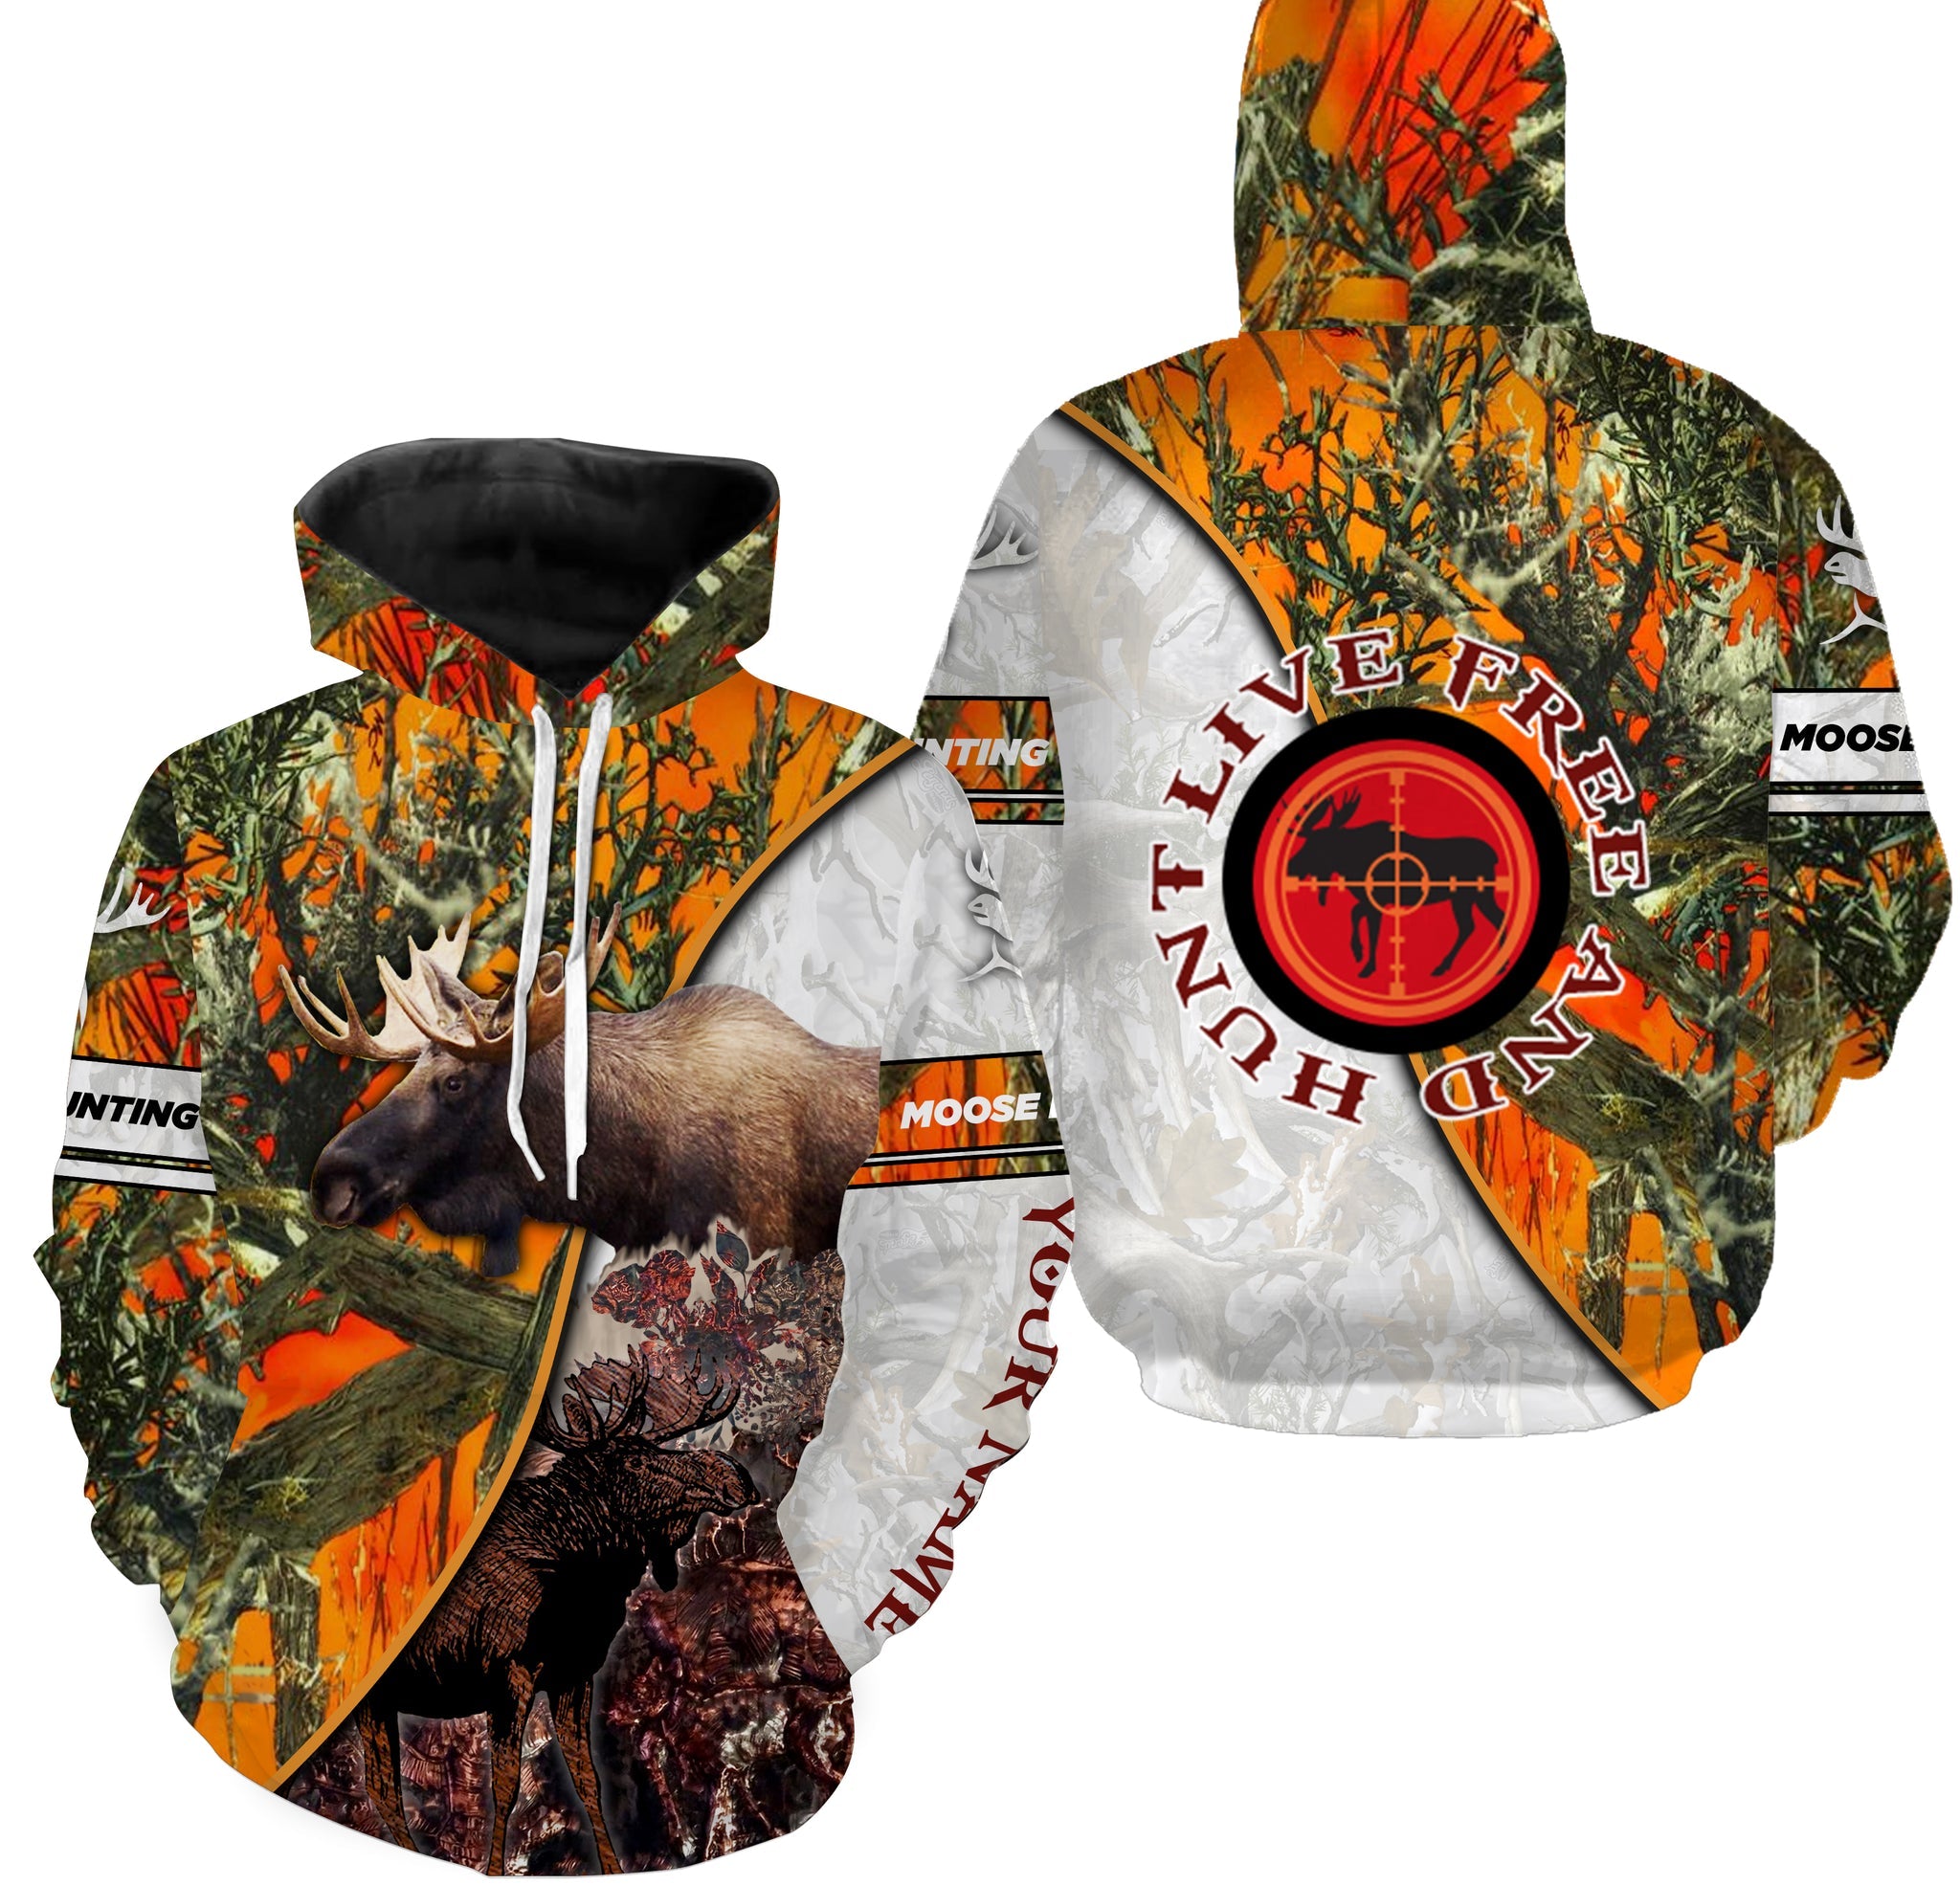 Moose Hunting Live Free And Hunt Orange Camo Shirts/ Personalized Moose Hunting Gift For Men/ Women